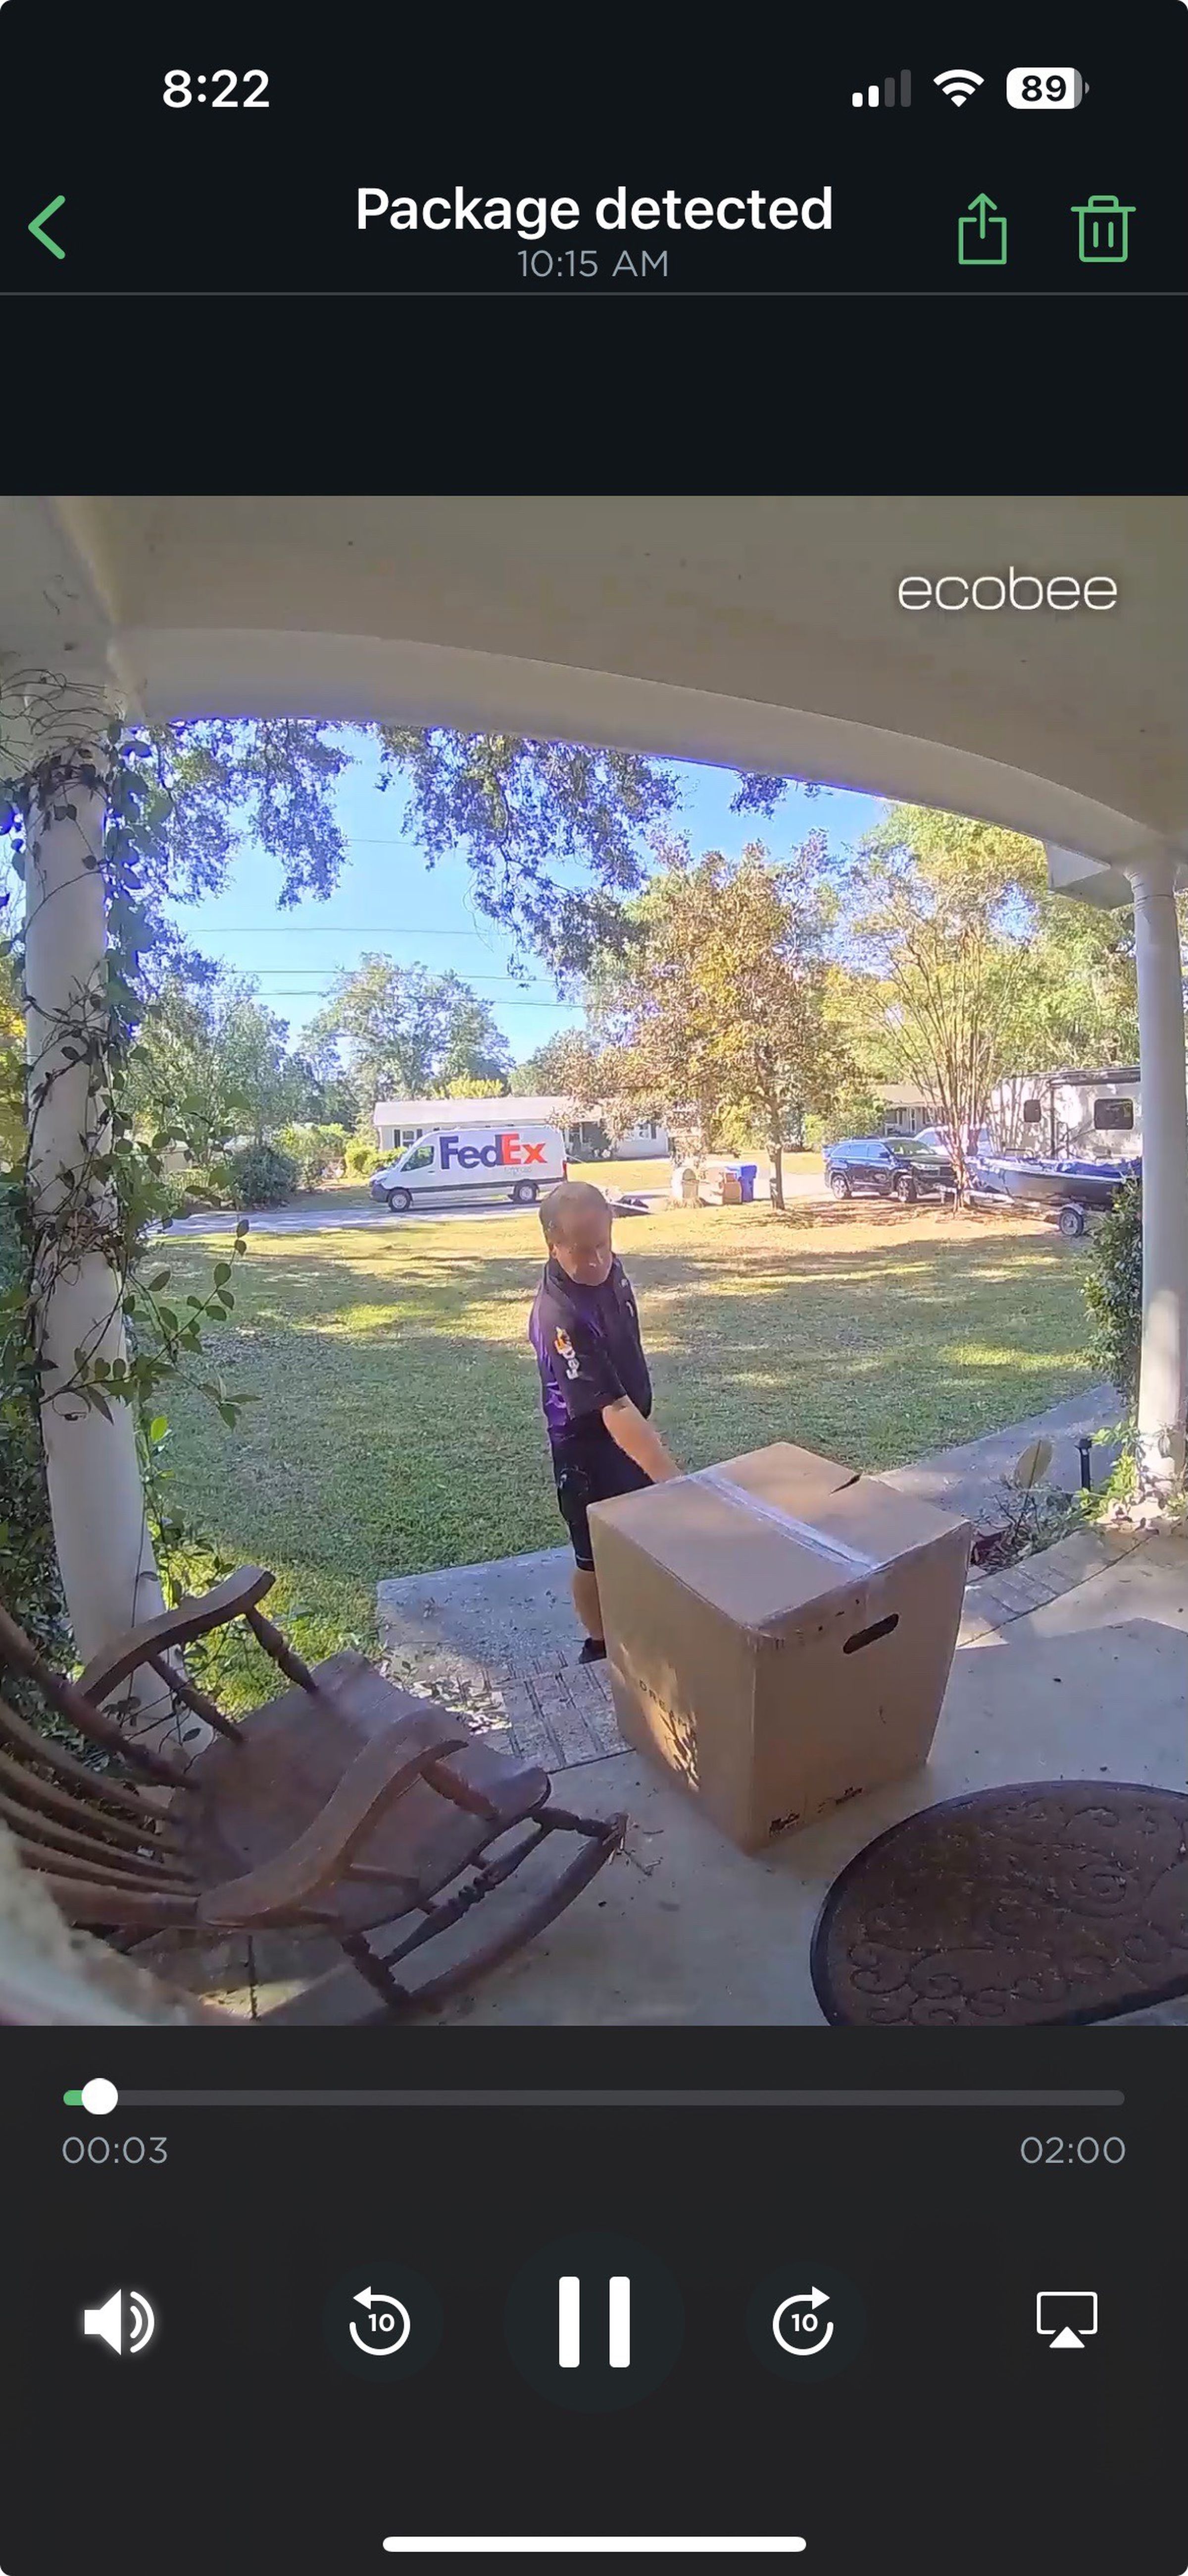 <em>This image shows a FedEx delivery person collecting a package from my font door. The doorbell only alerted me to a package being present, not a person. So I missed him taking the package away.</em>